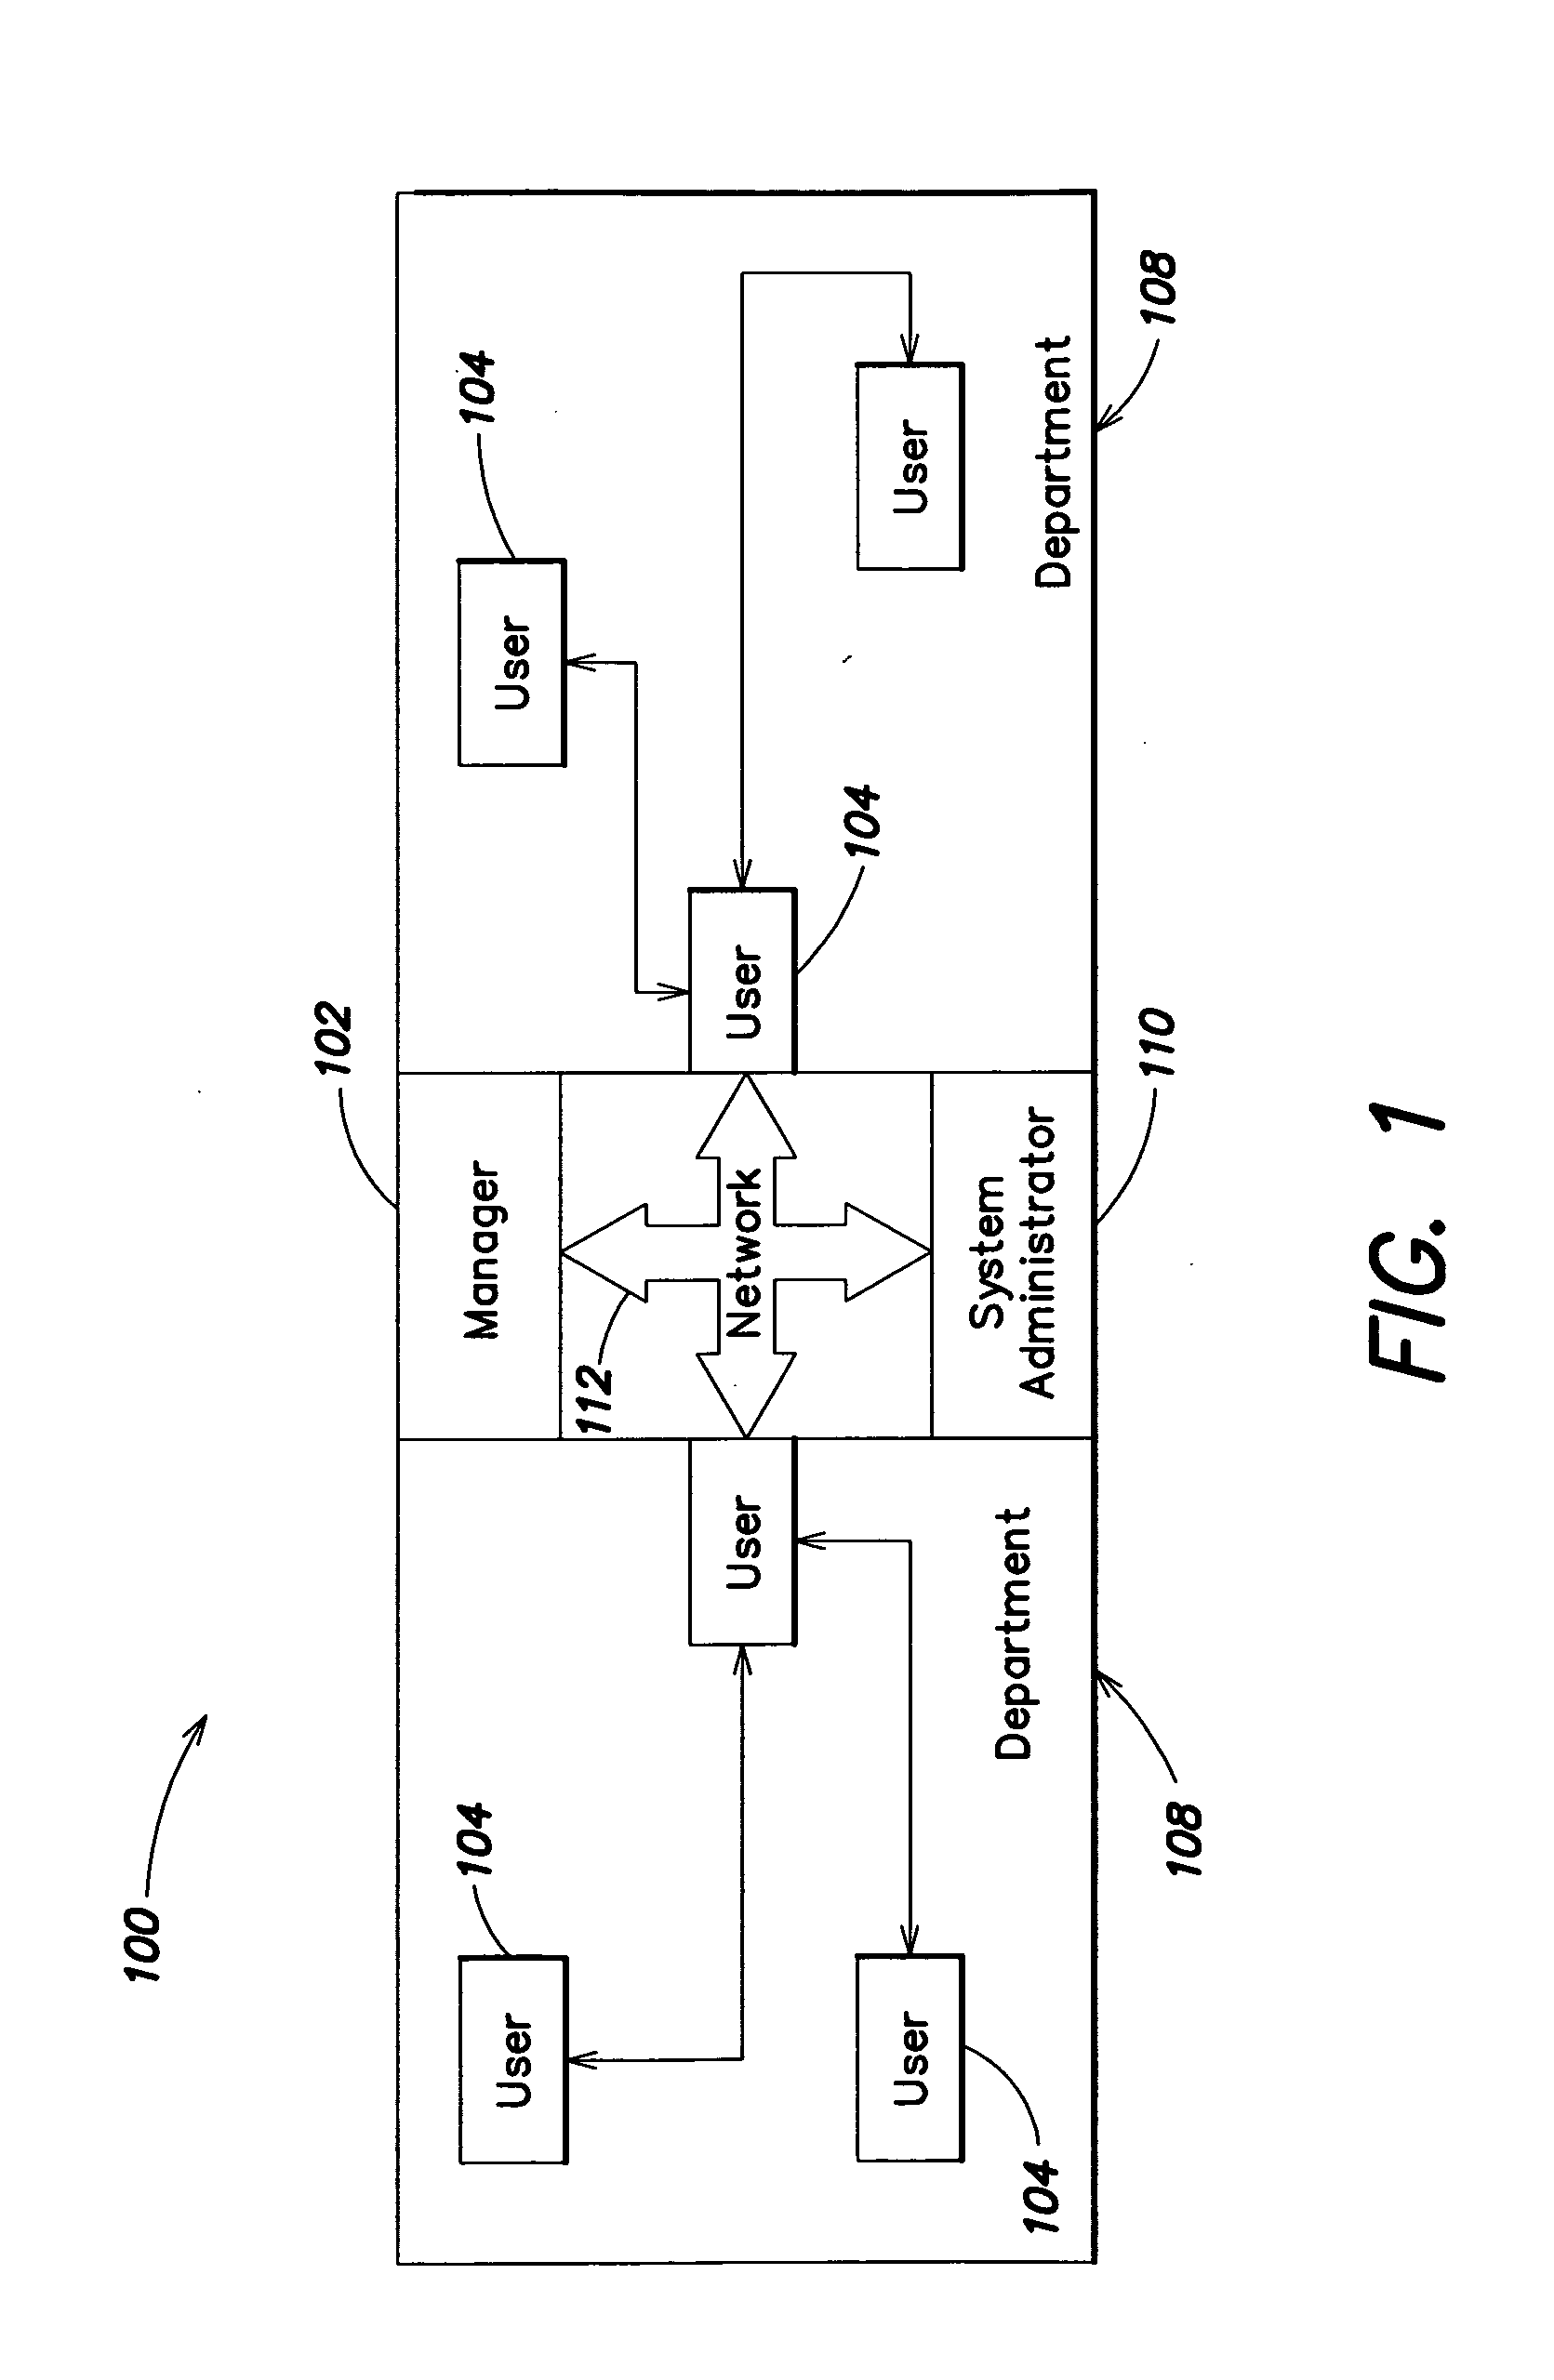 Methods and systems for monitoring user, application or device activity